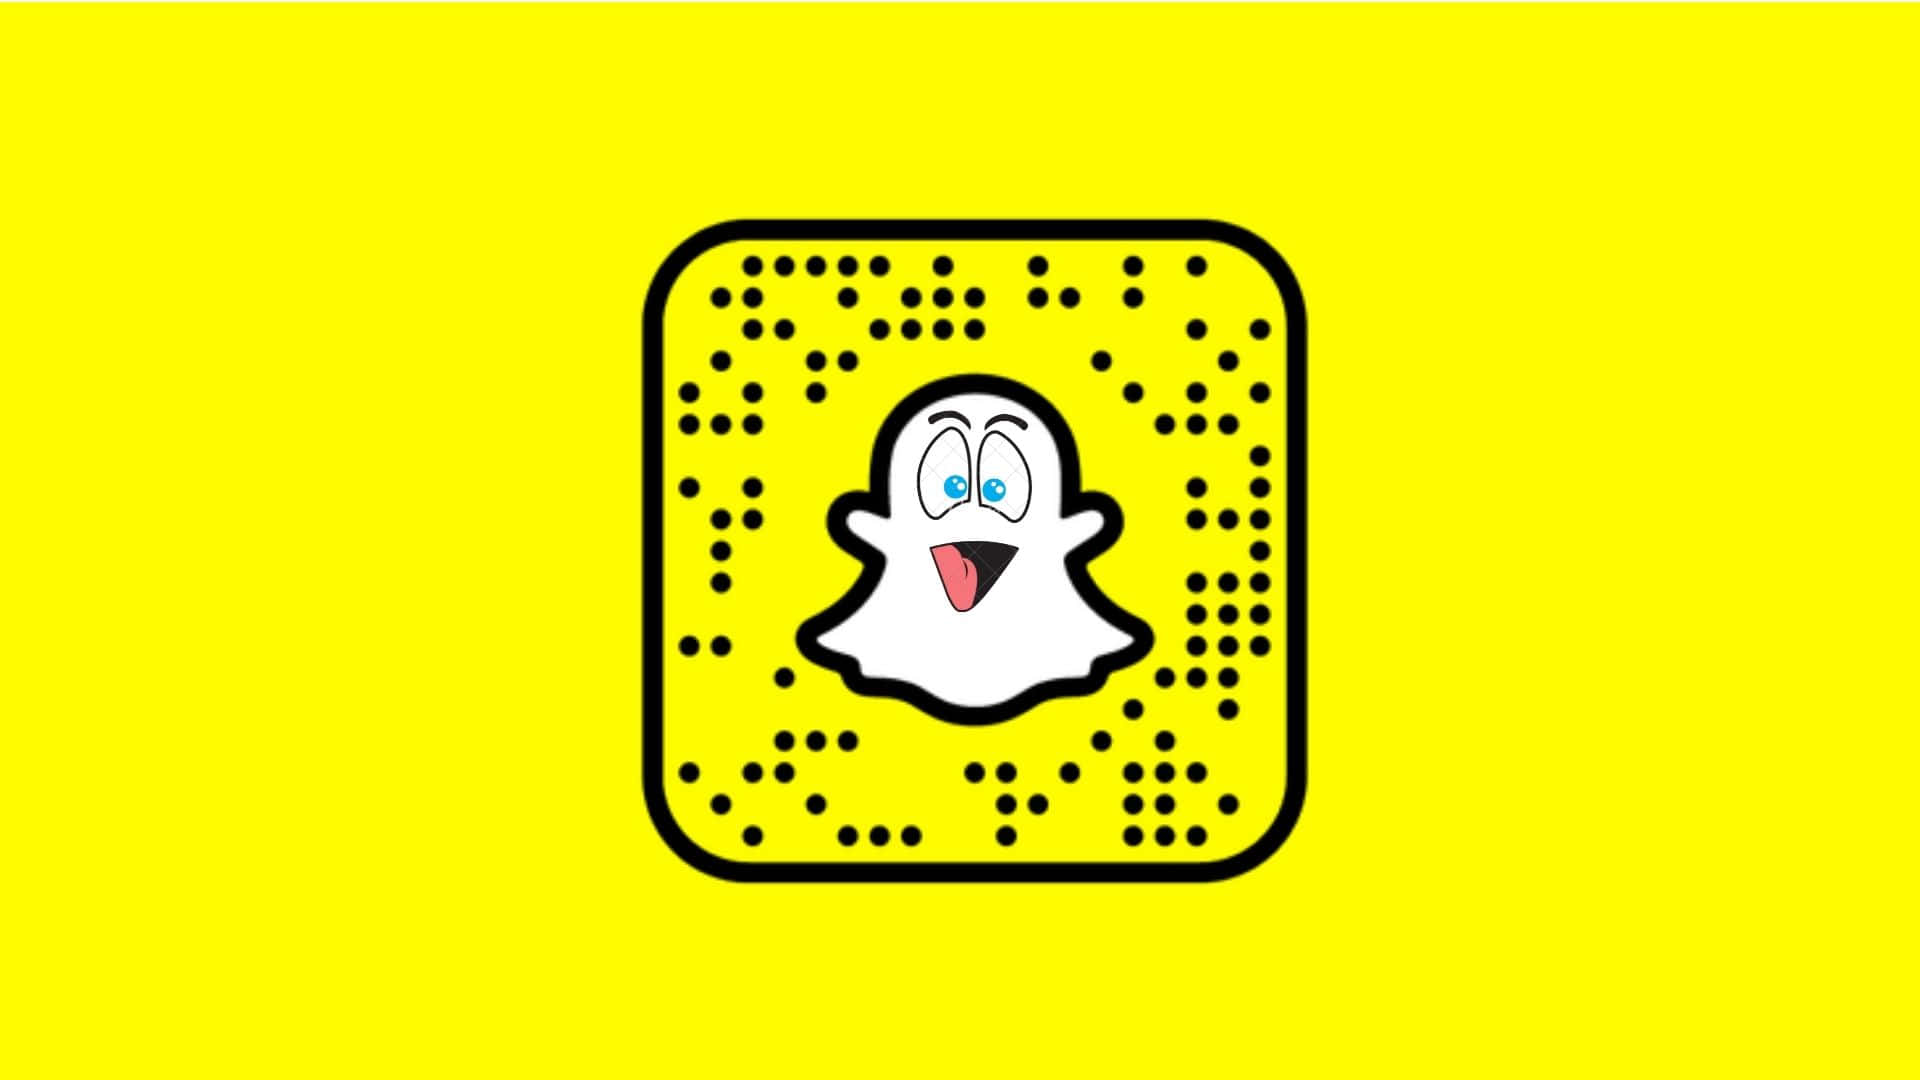 See how many memories you can make with Snapchat!